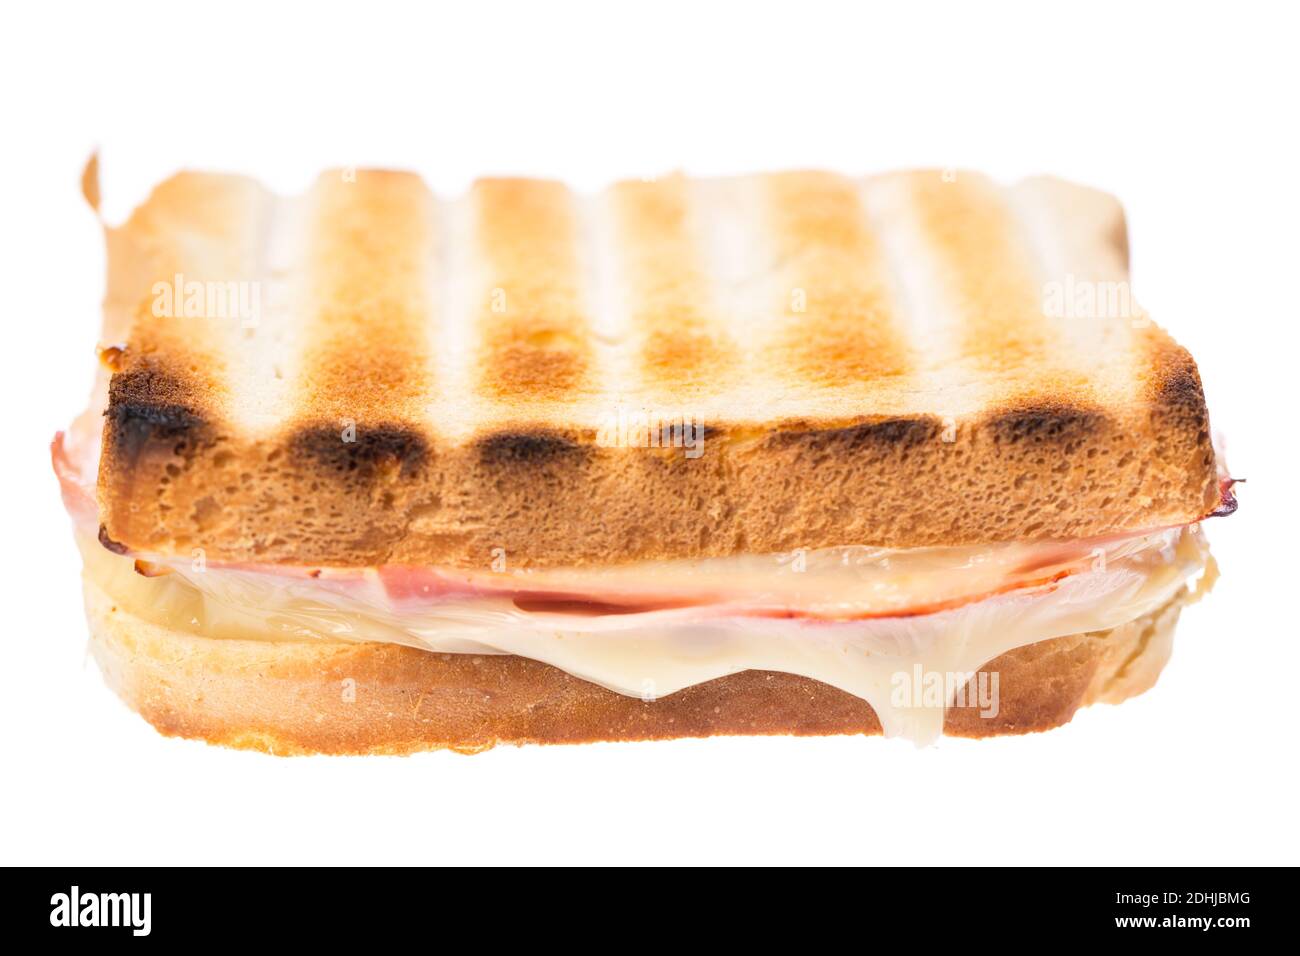 One ham and cheese sandwiches from the front on white background Stock Photo